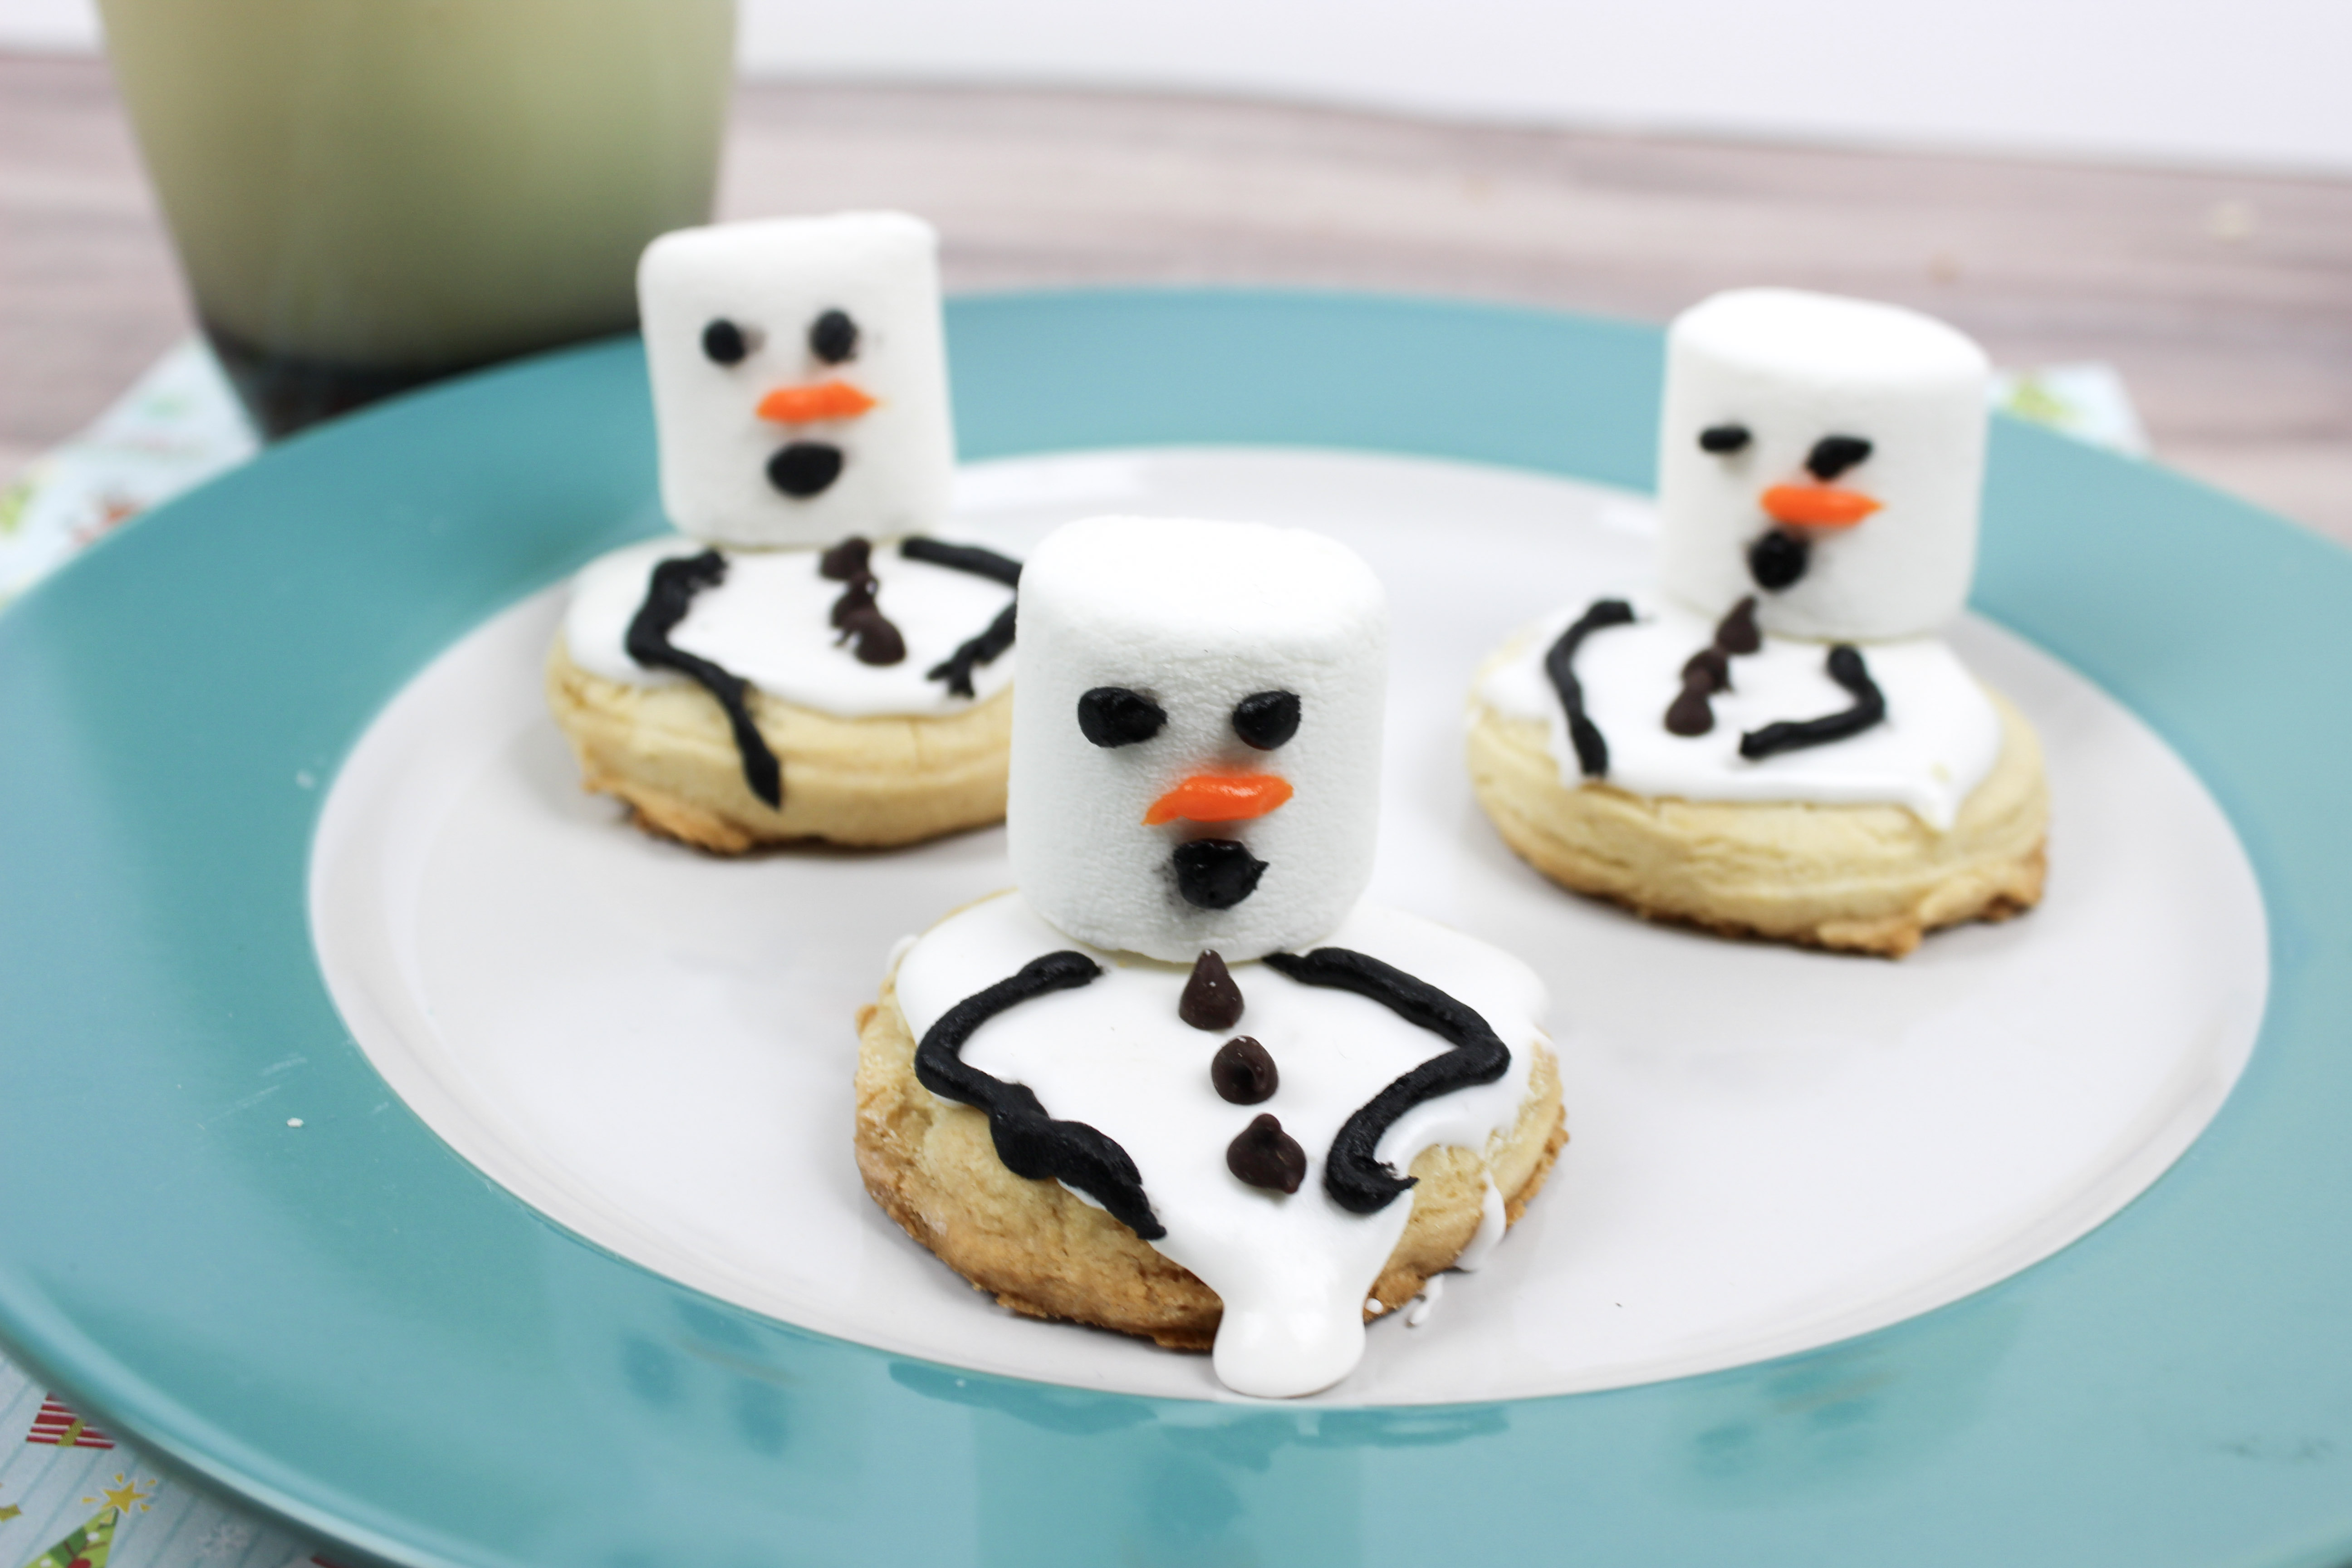 Baby it's cold outside, but with these cookies, the snowman is melting. Melted snowman cookies are a perfect treat during those long cold days. Make melting snowman cookies for parties, gifts or just because they are delicious.